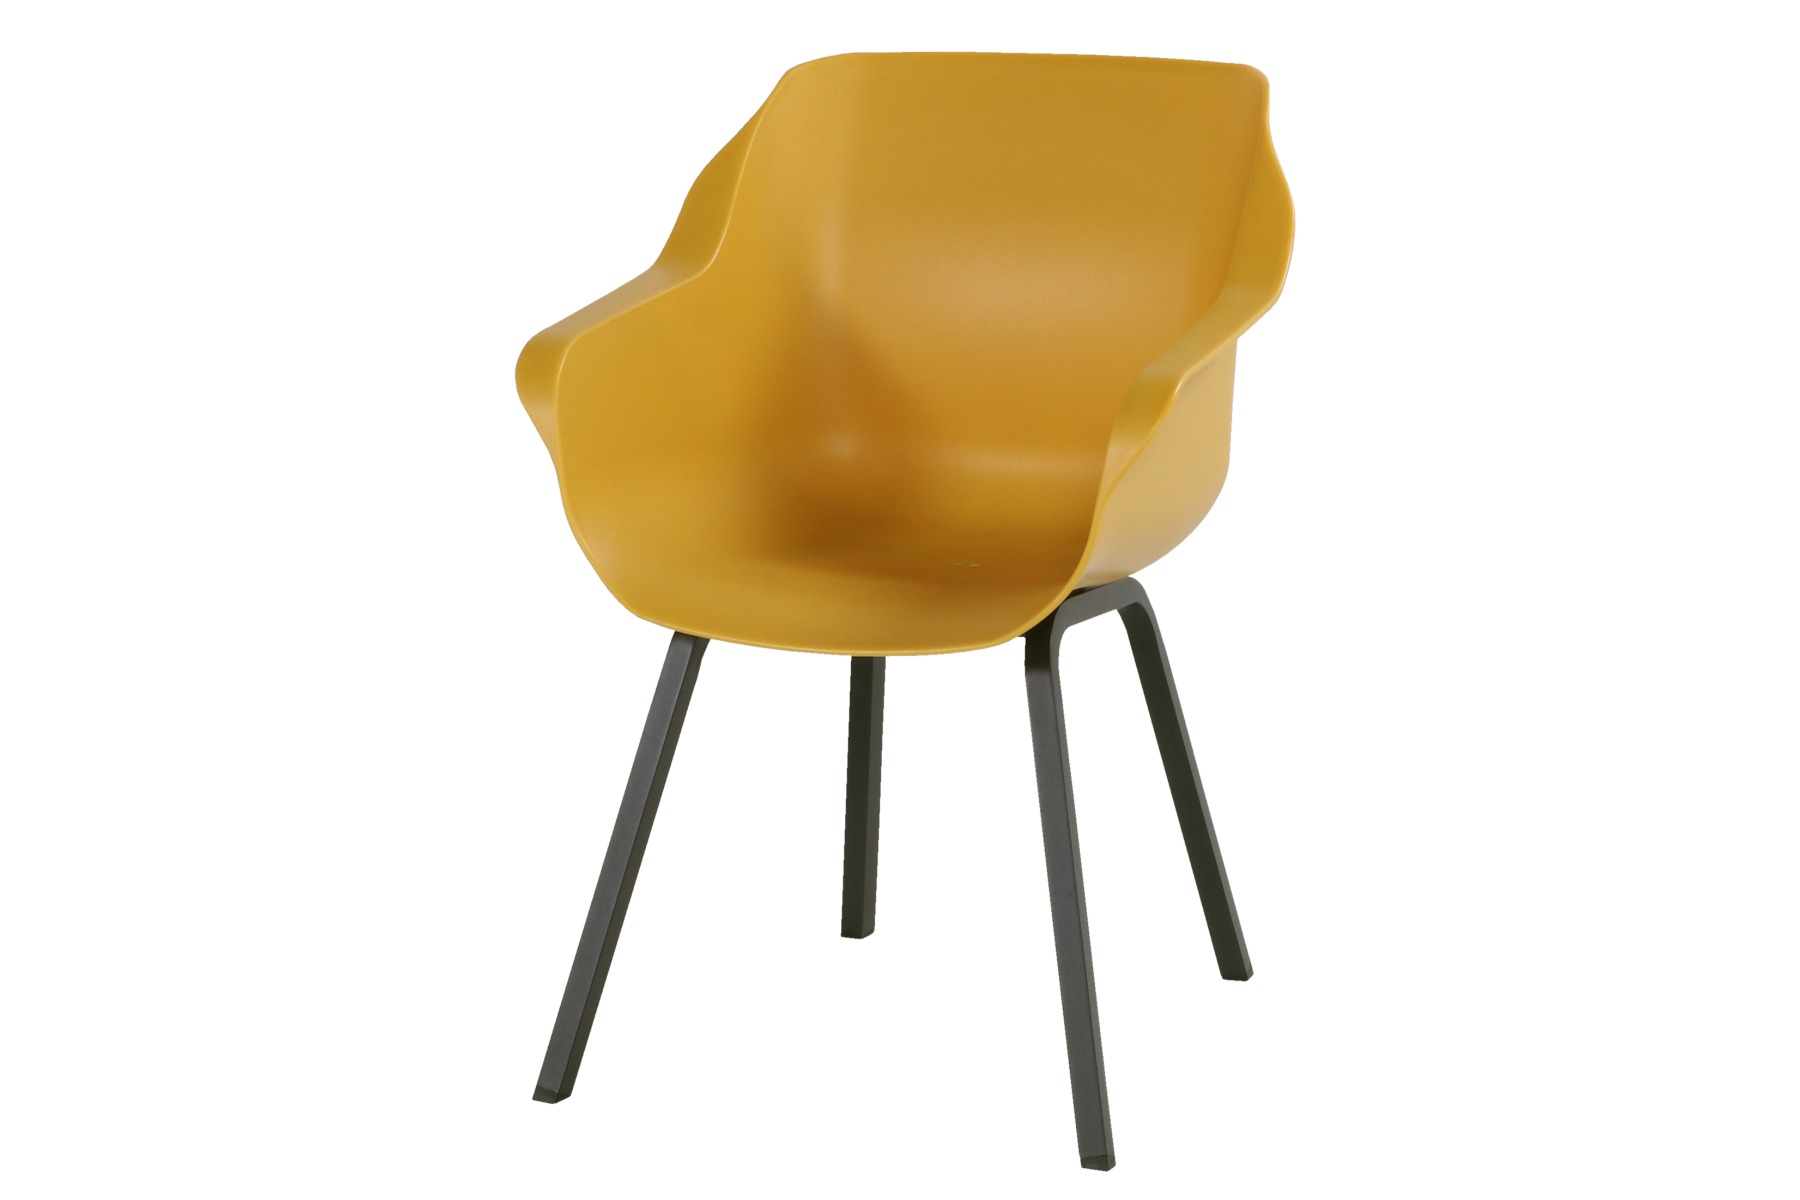 Hartman Sophie Element dining armstoel - Curry Yellow - Carbon Black poot